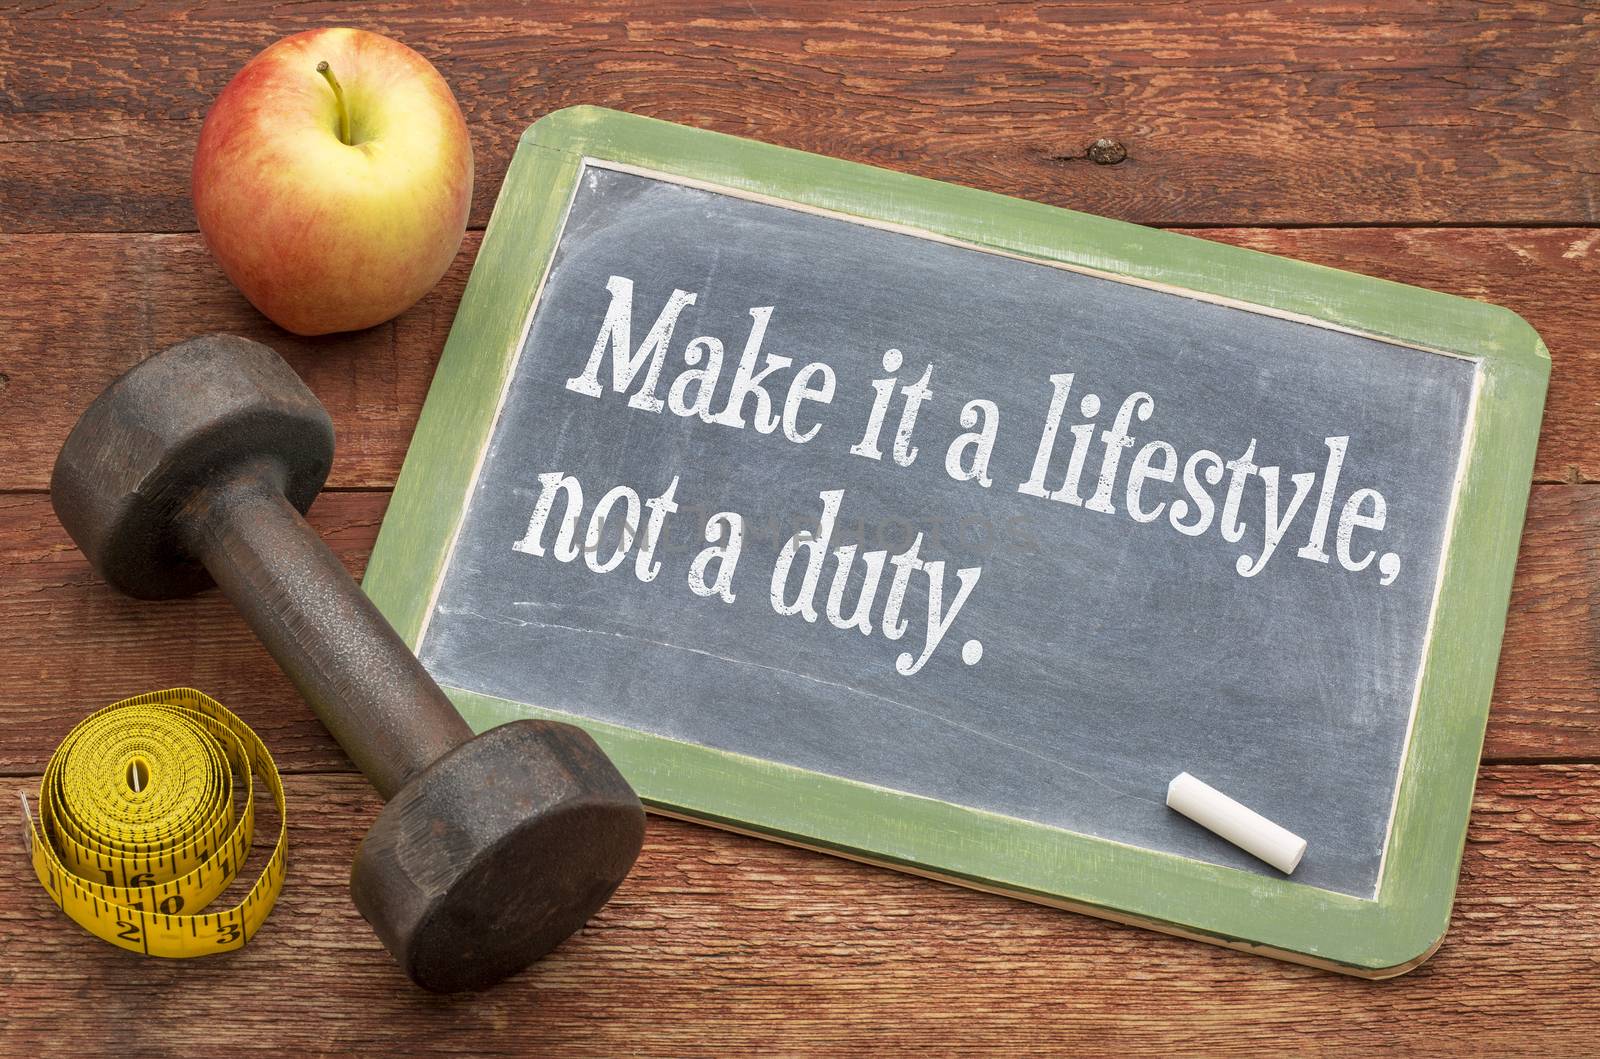 Make it a lifestyle, not a duty - fitness and healthy life concept  -  slate blackboard sign against weathered red painted barn wood with a dumbbell, apple and tape measure